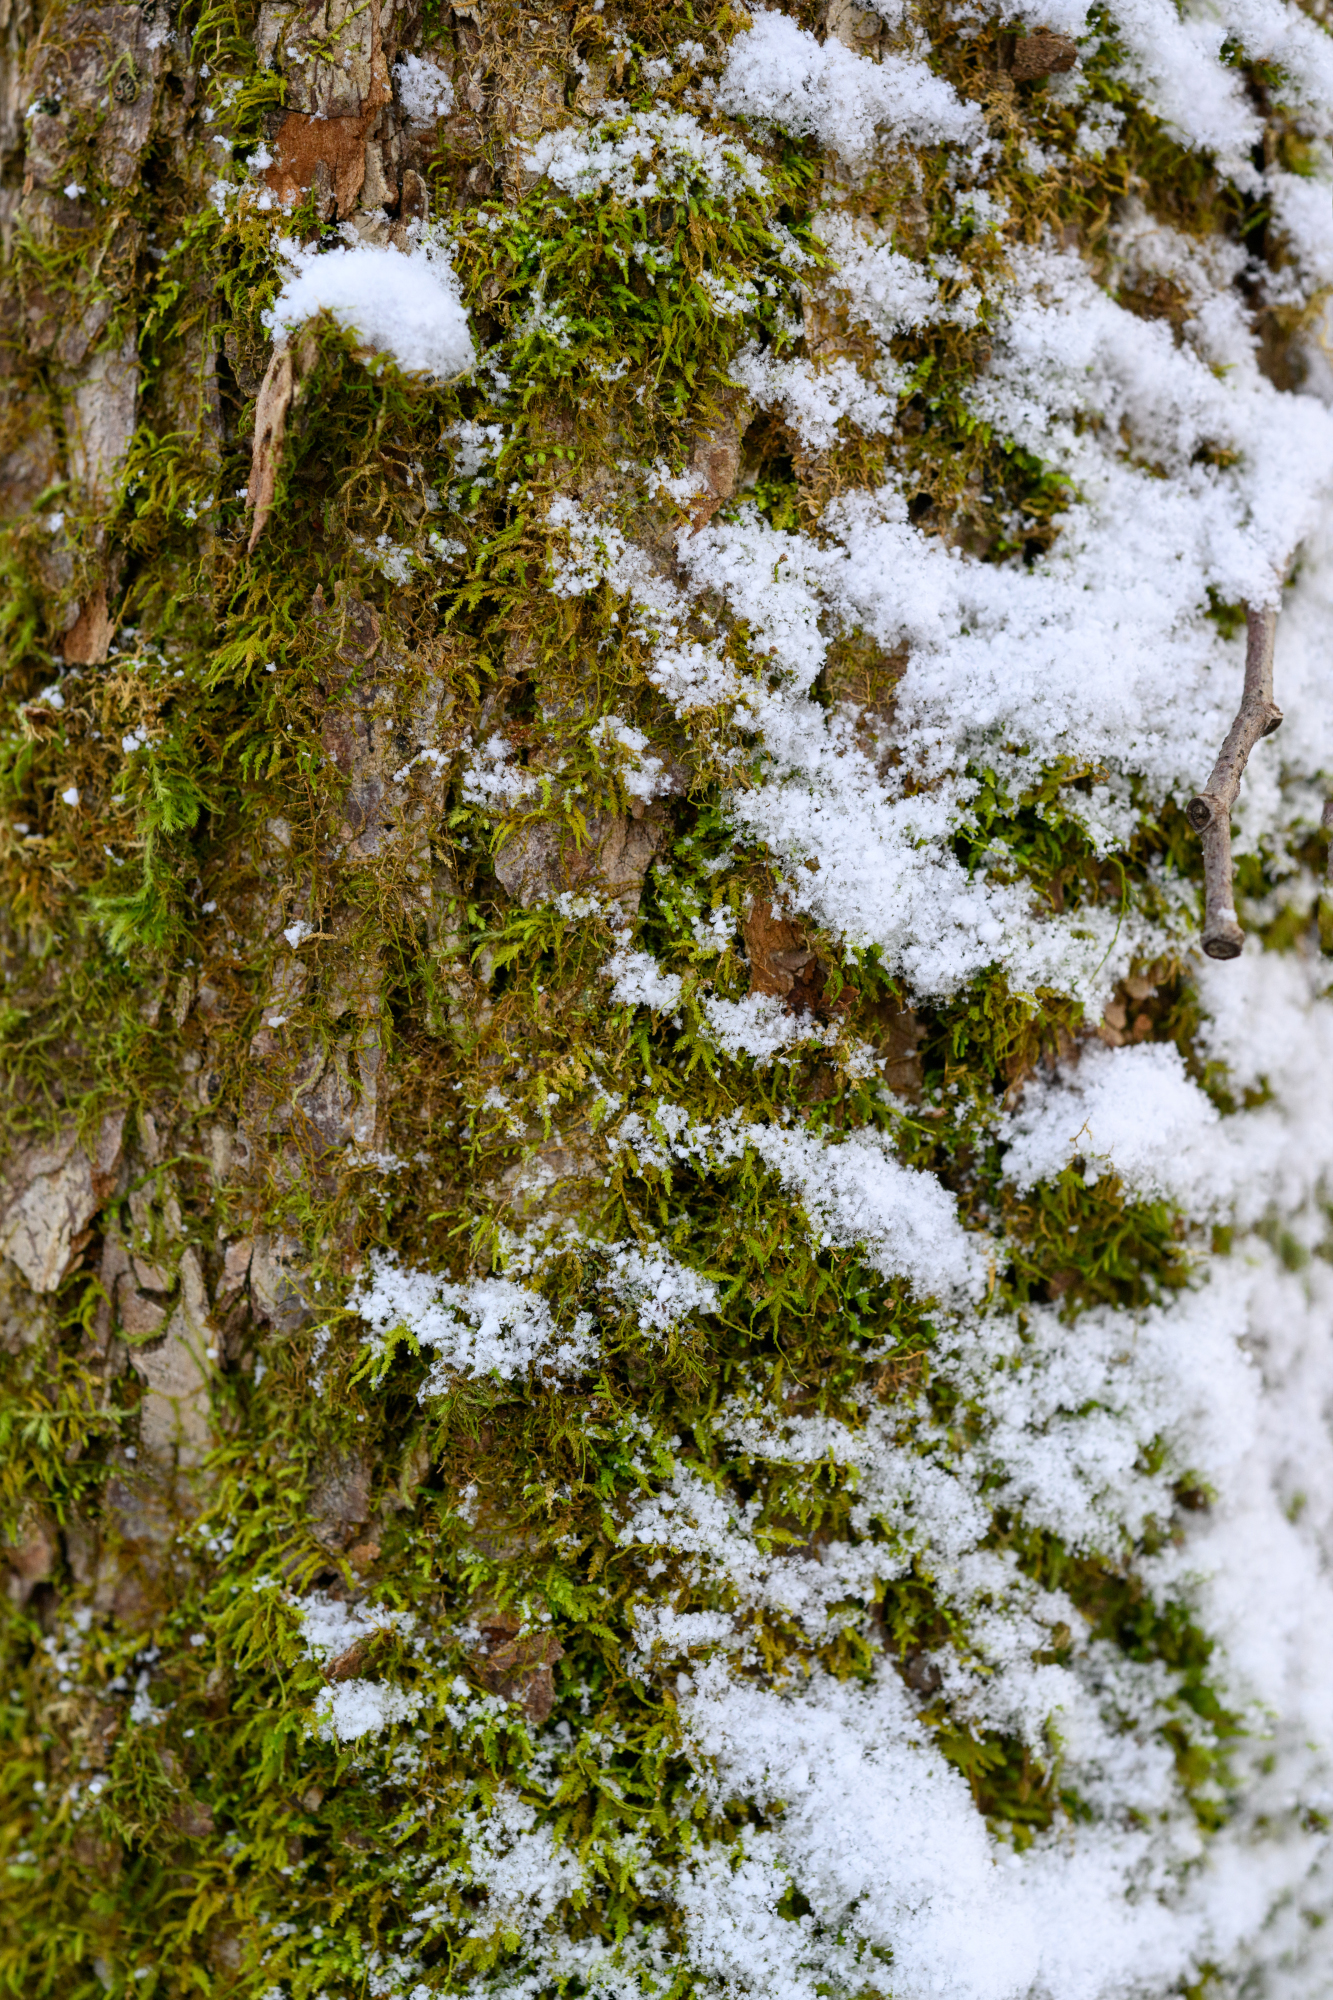 a thin layer of snow covers half of the moss on a tree trunk.